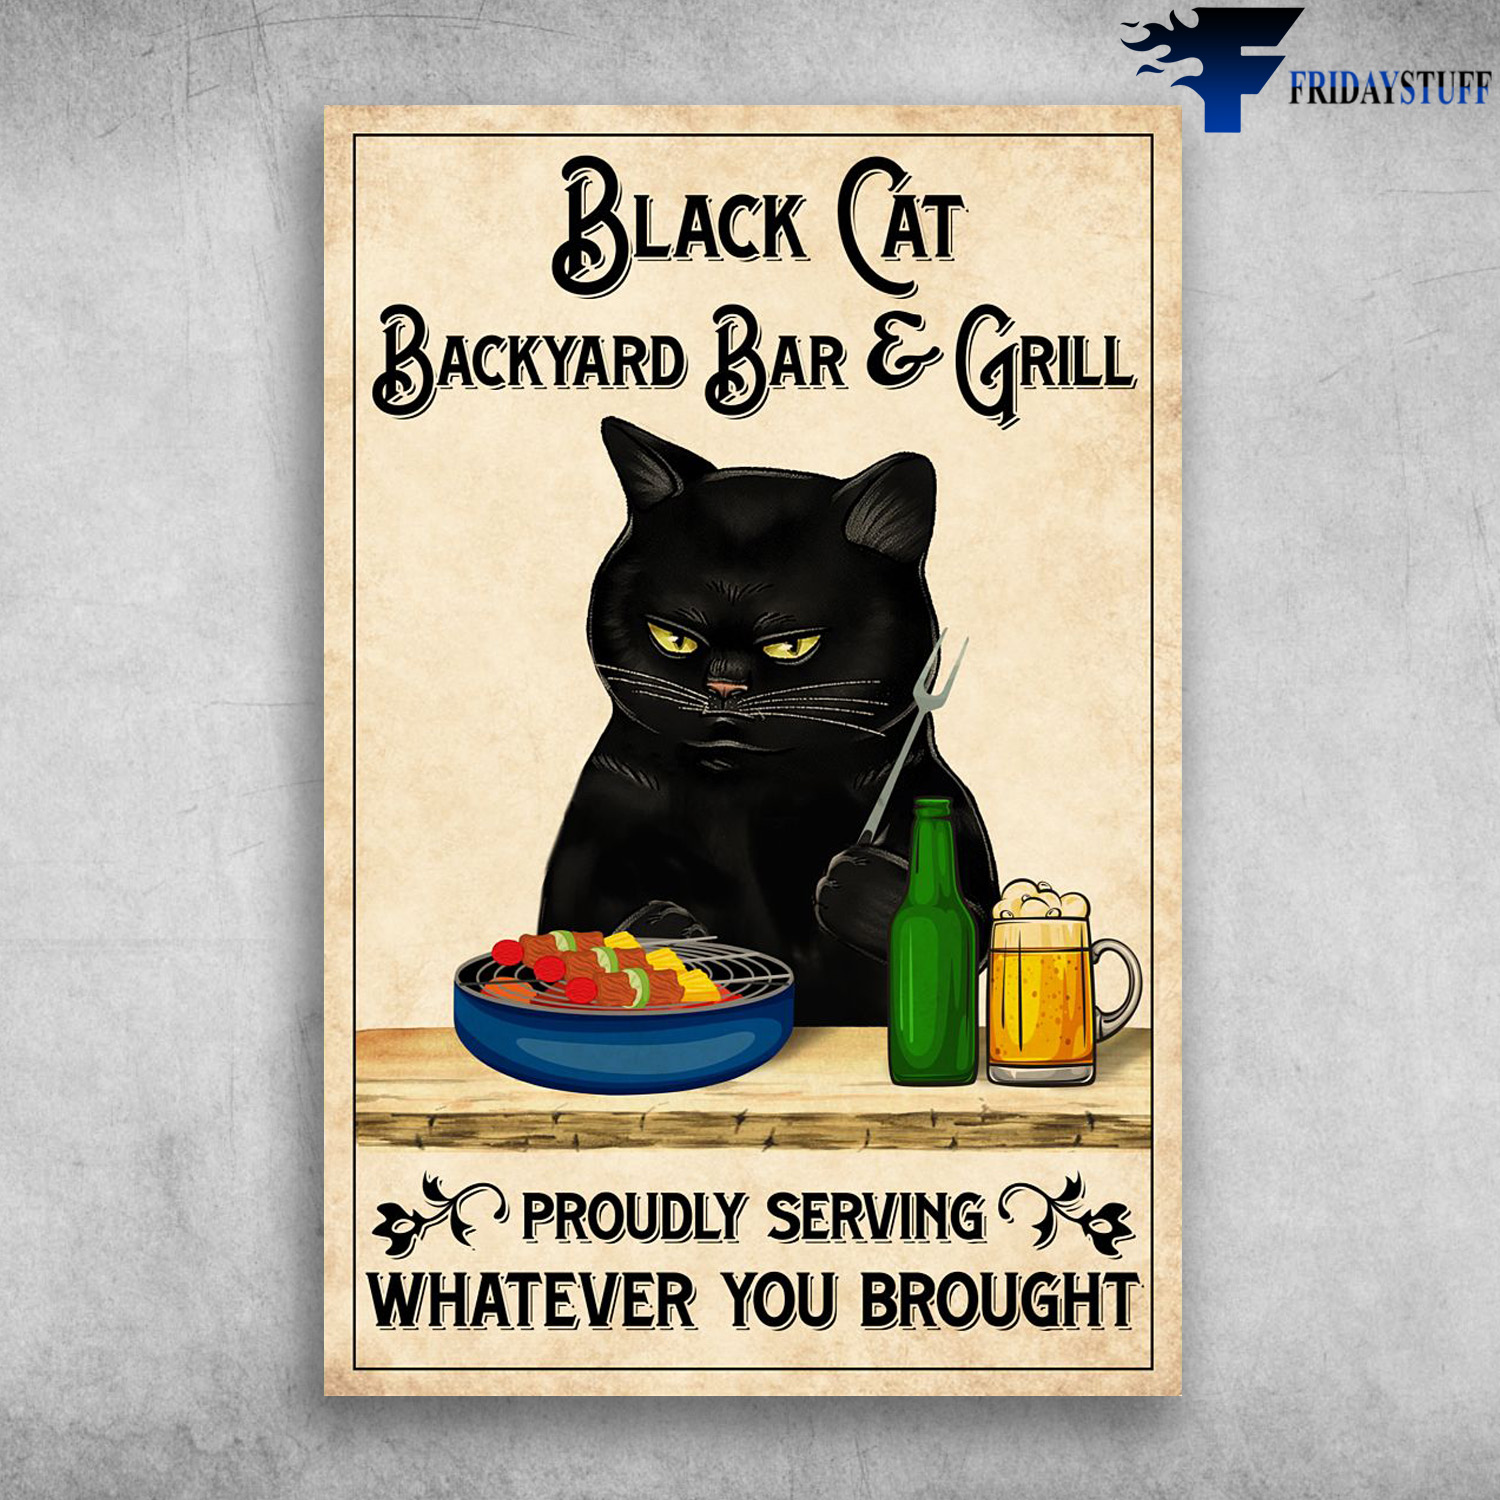 The Black Cat Cook And Drink - Black Cat Backyard Bar And Girl, Proudly Serving Whatever You Brought